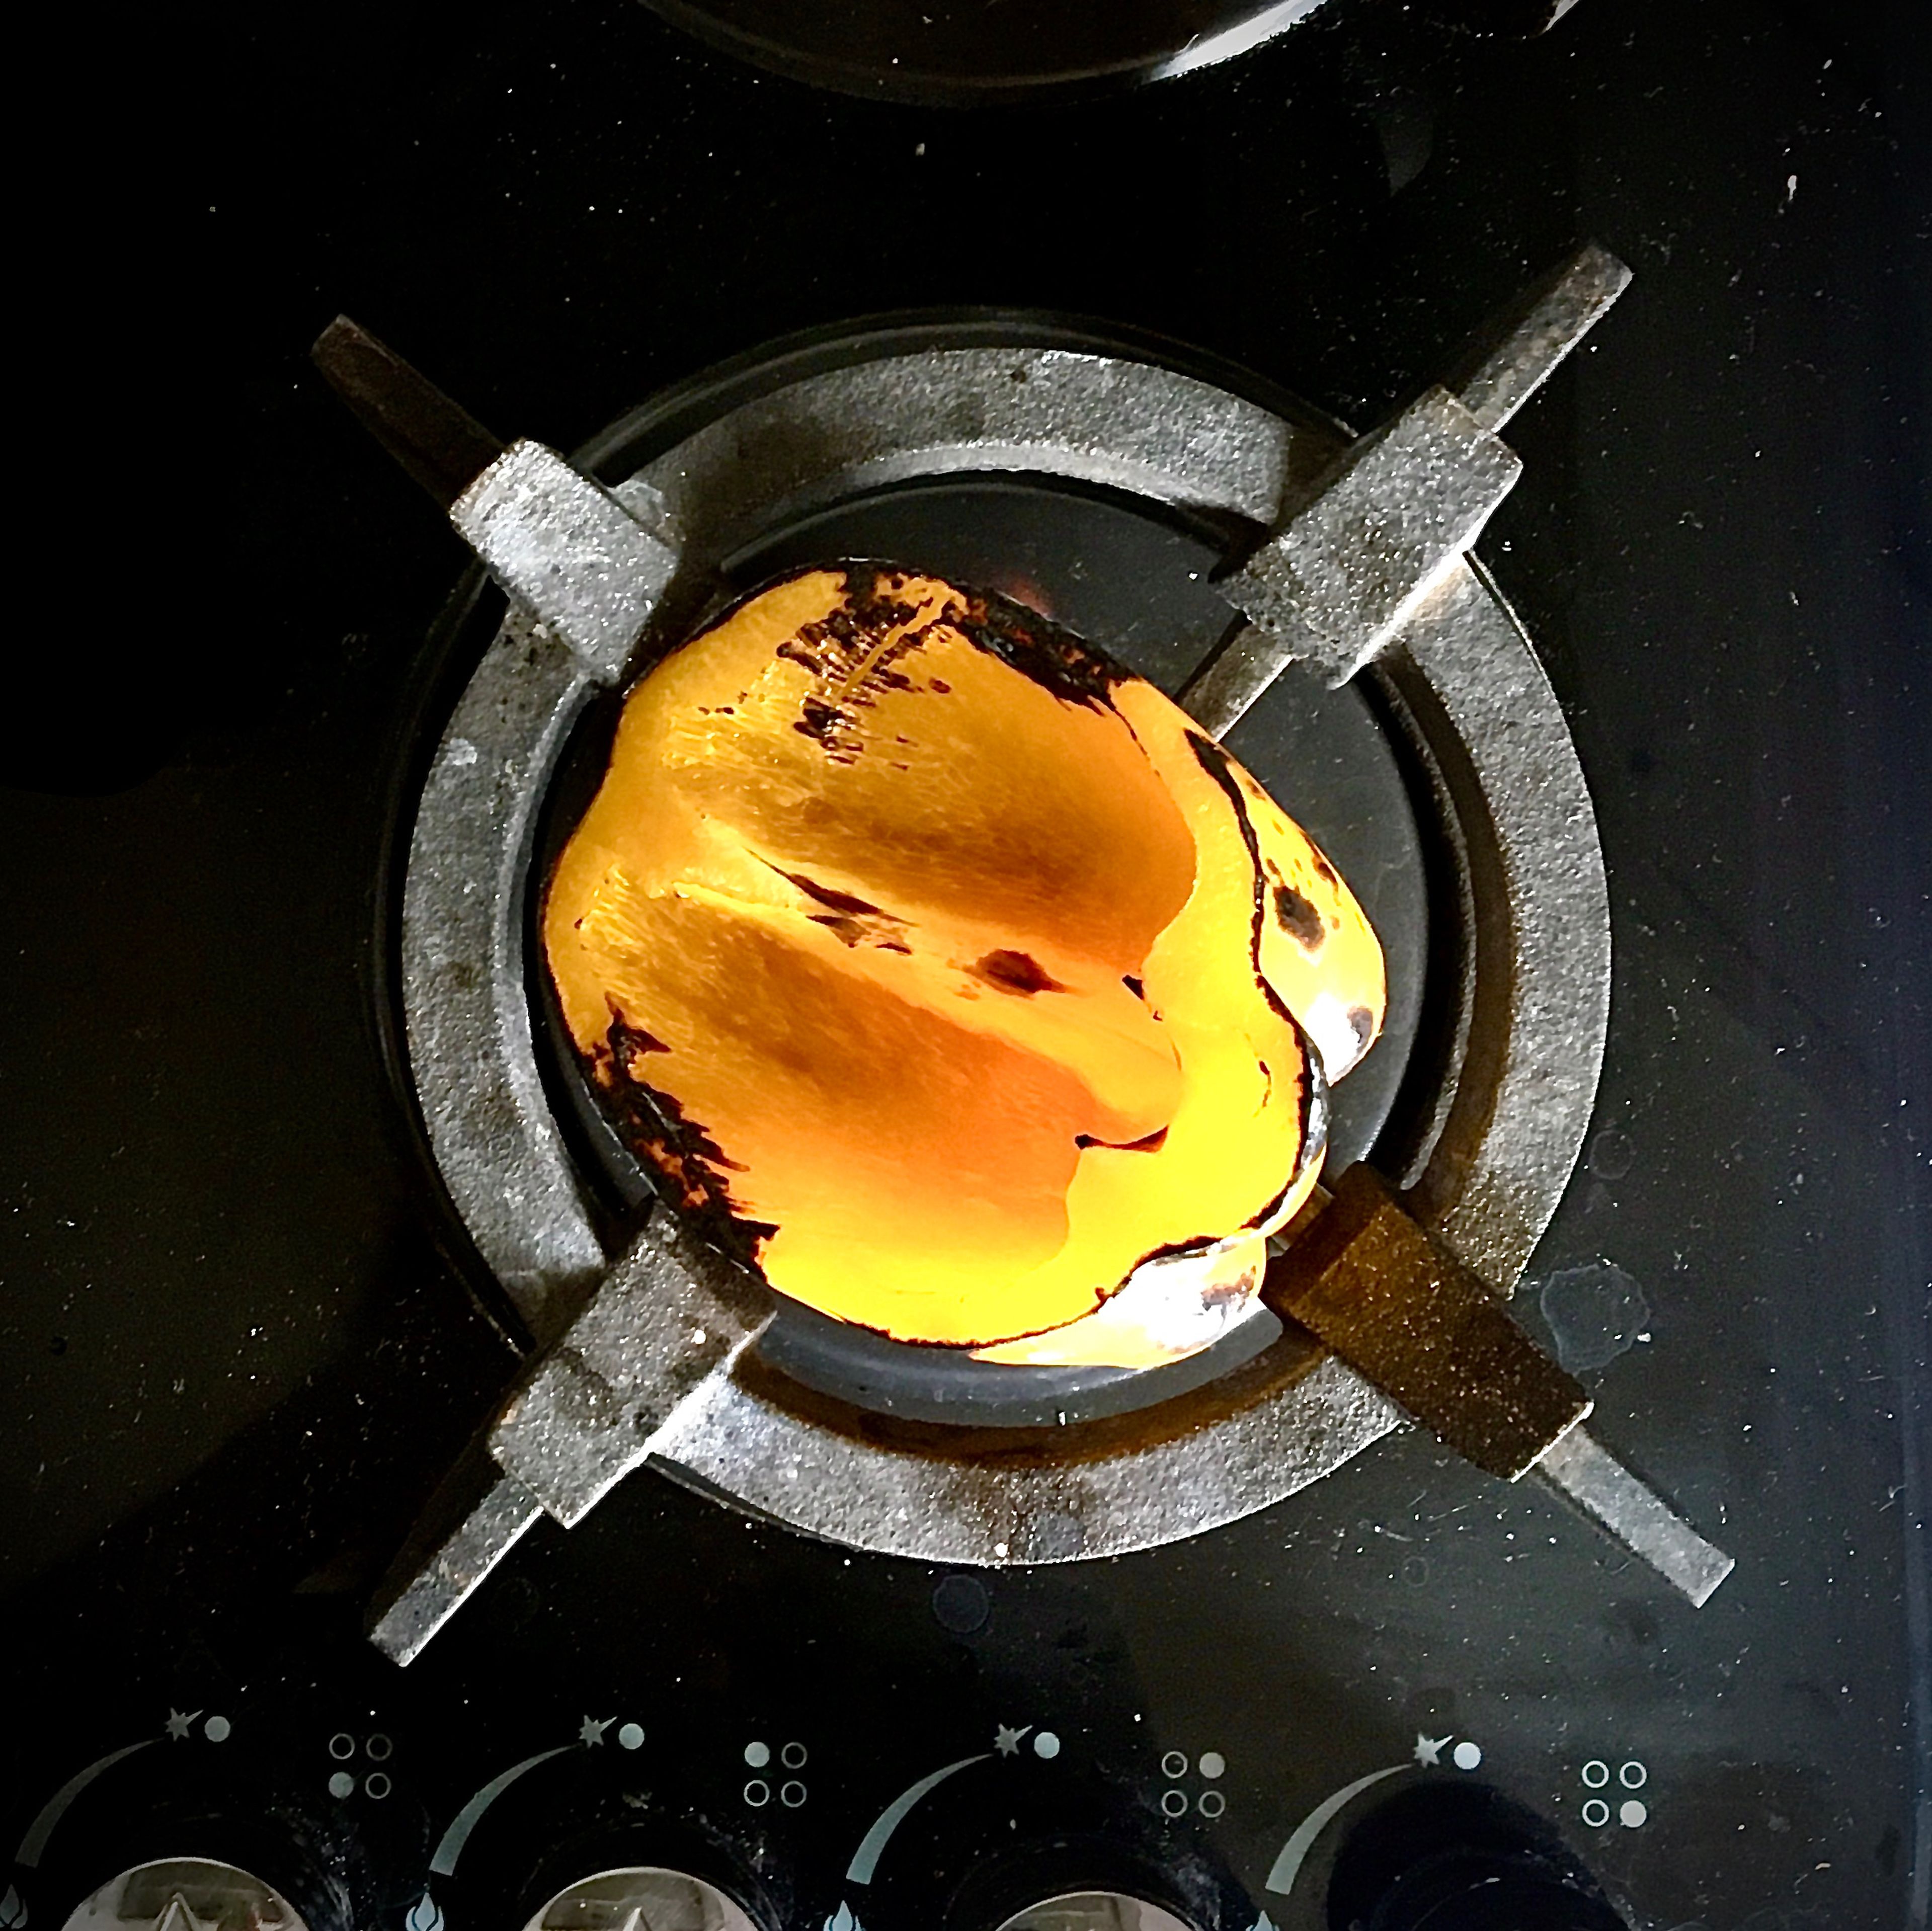 Put the un-julienned part of yellow bell pepper over the flames of your hob gas and roast until tender and pleasantly smoky. Transfer to a small bowl to cool. Cover with a lid to ease the peeling process.